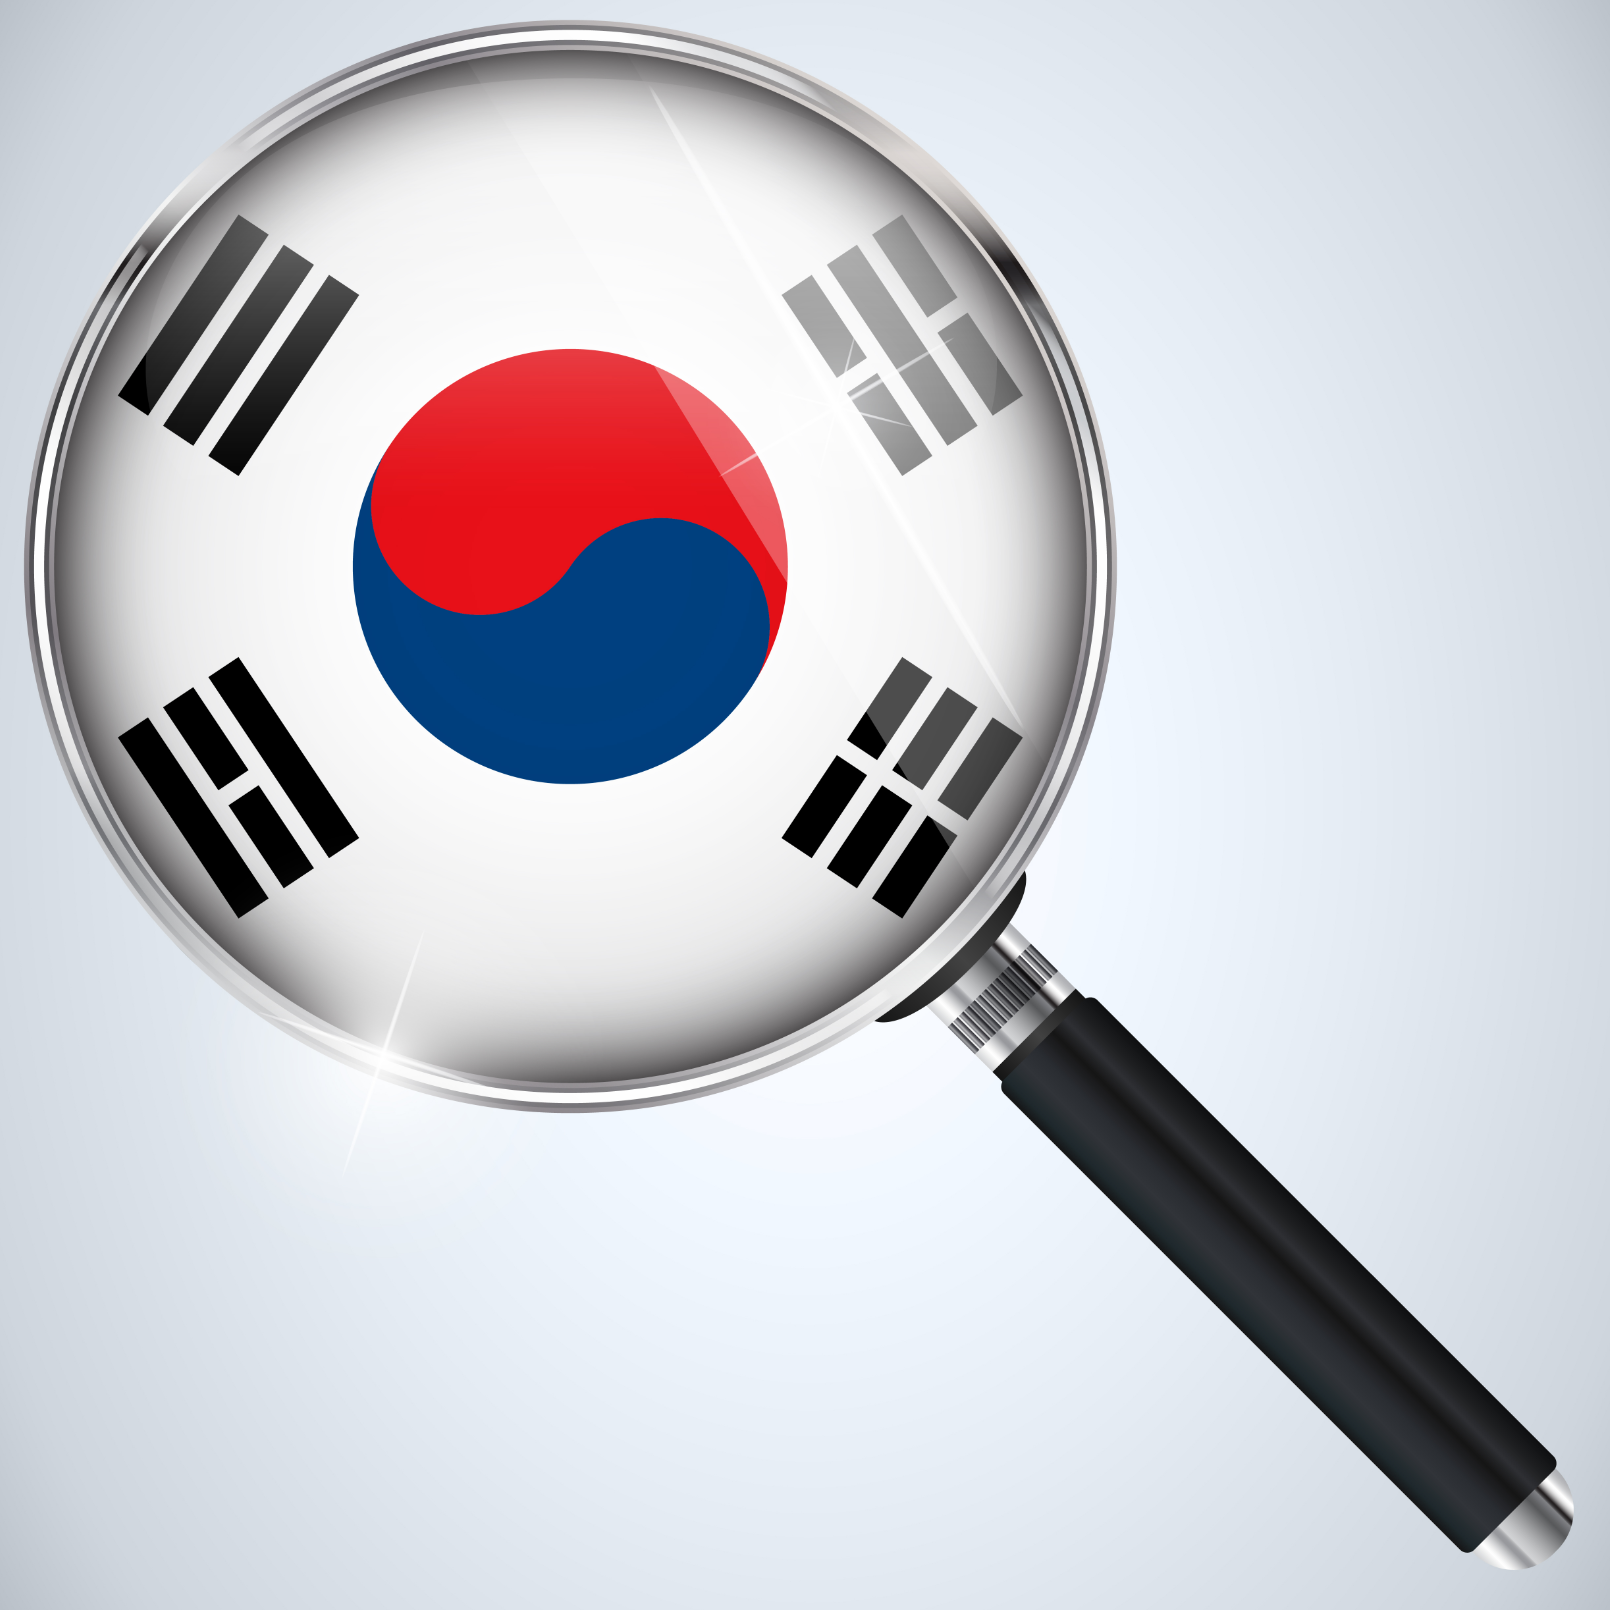 Korean Authority Slaps Exchanges With Licensing Requirements